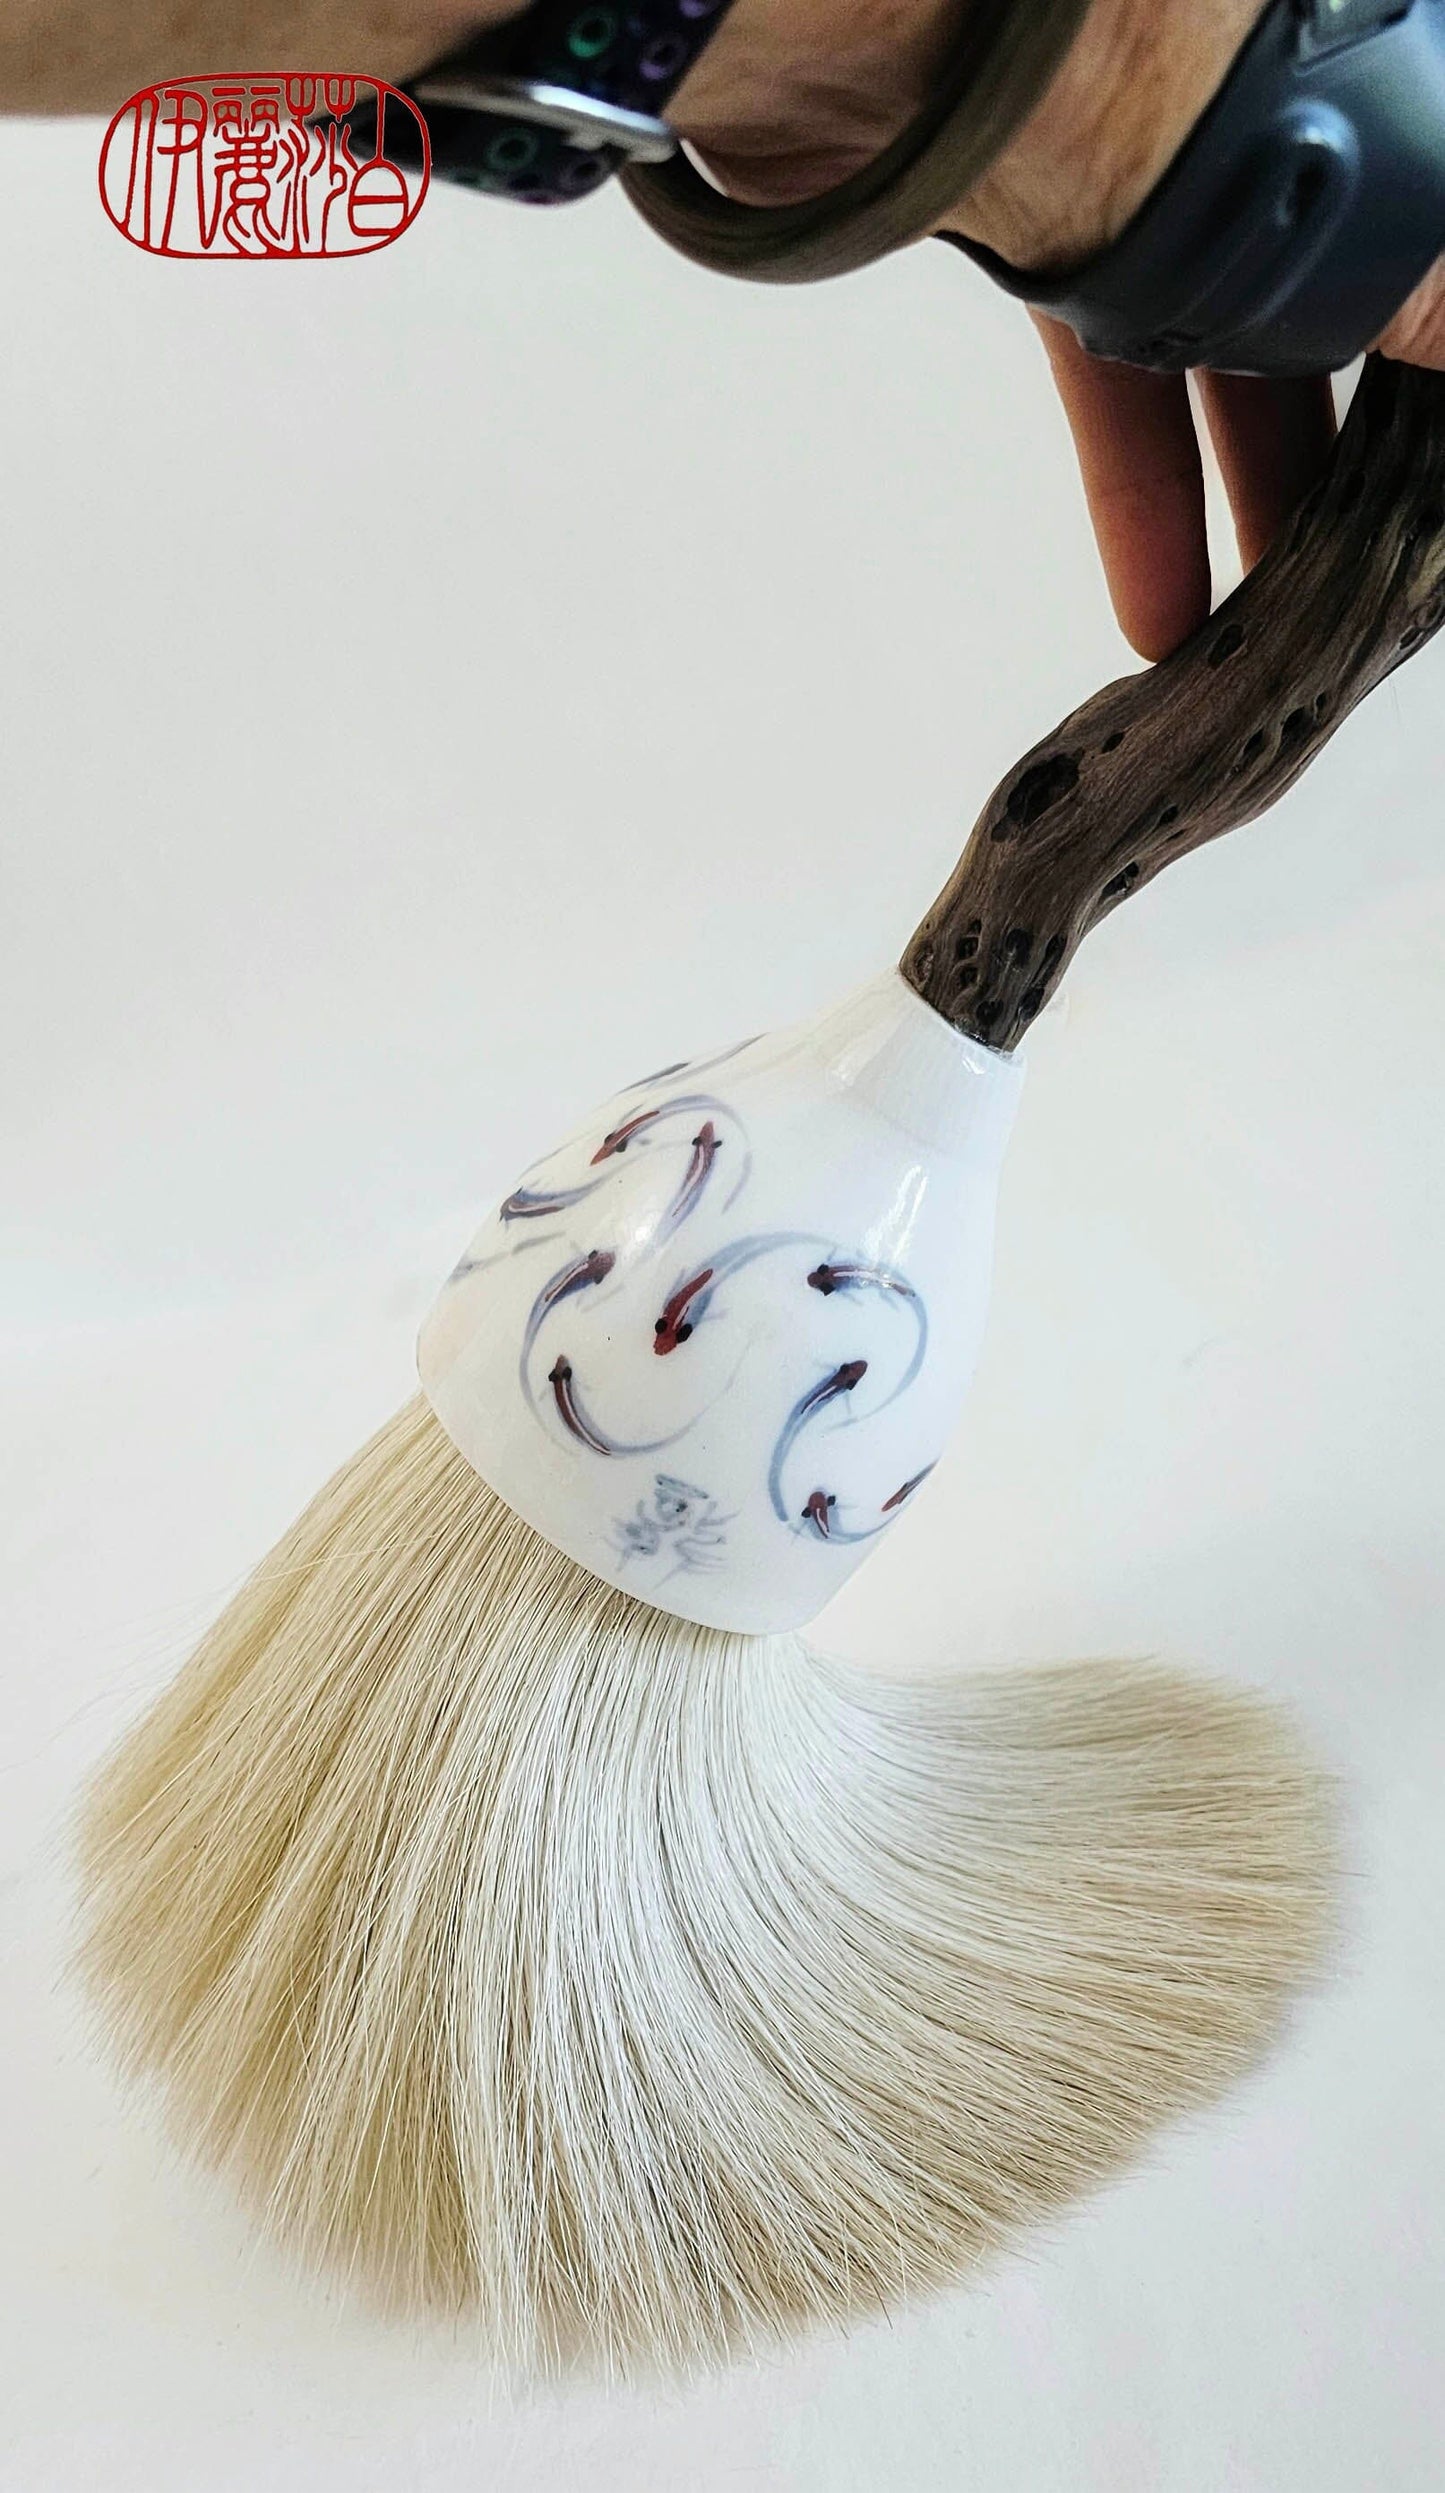 Duster with grip, white horse hair Brushes